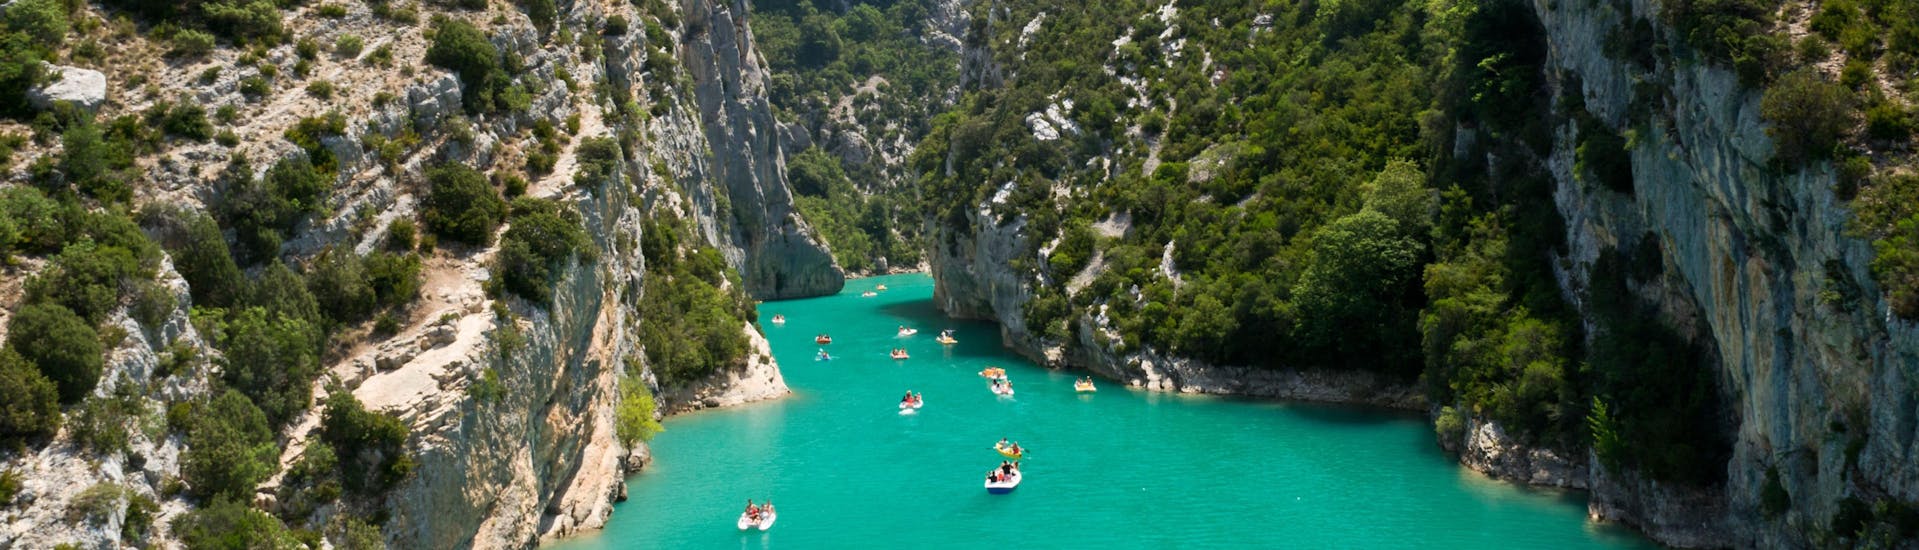 View of the Gorges du Verdon, where one can do canyoning in the Chaos de l'Imbut canyon.